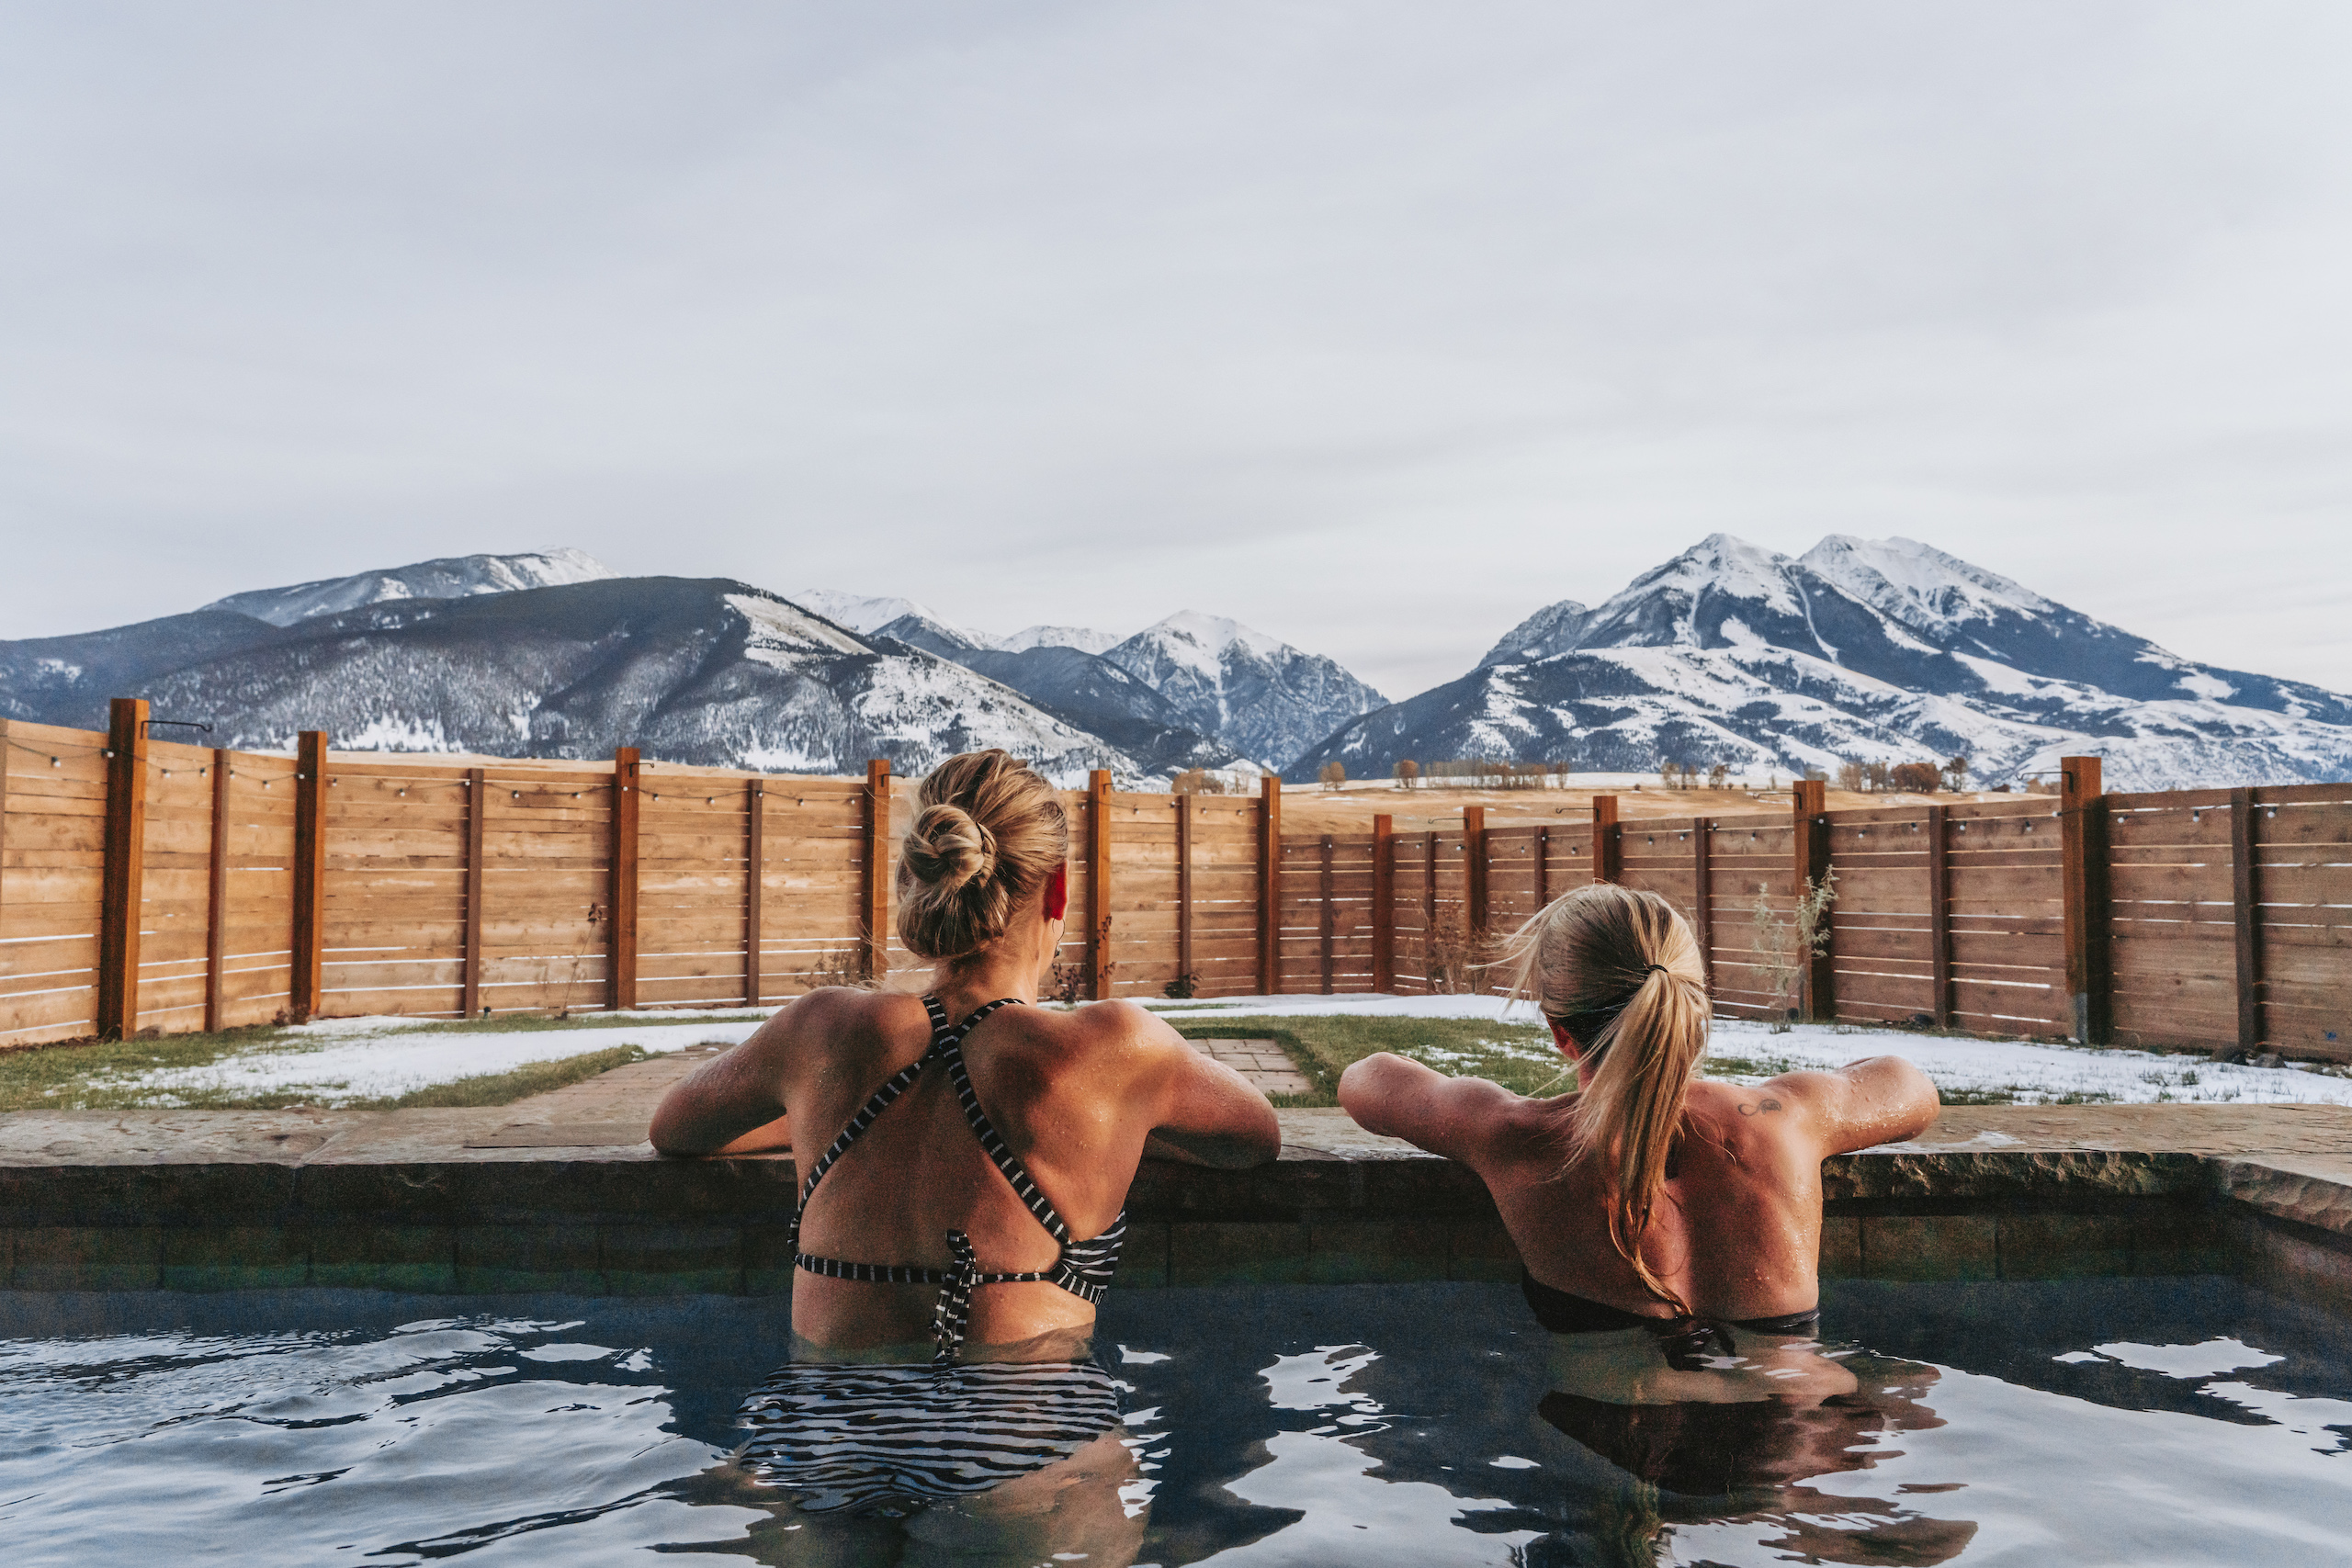 Two women in a hot tub looking out at snowy mountains